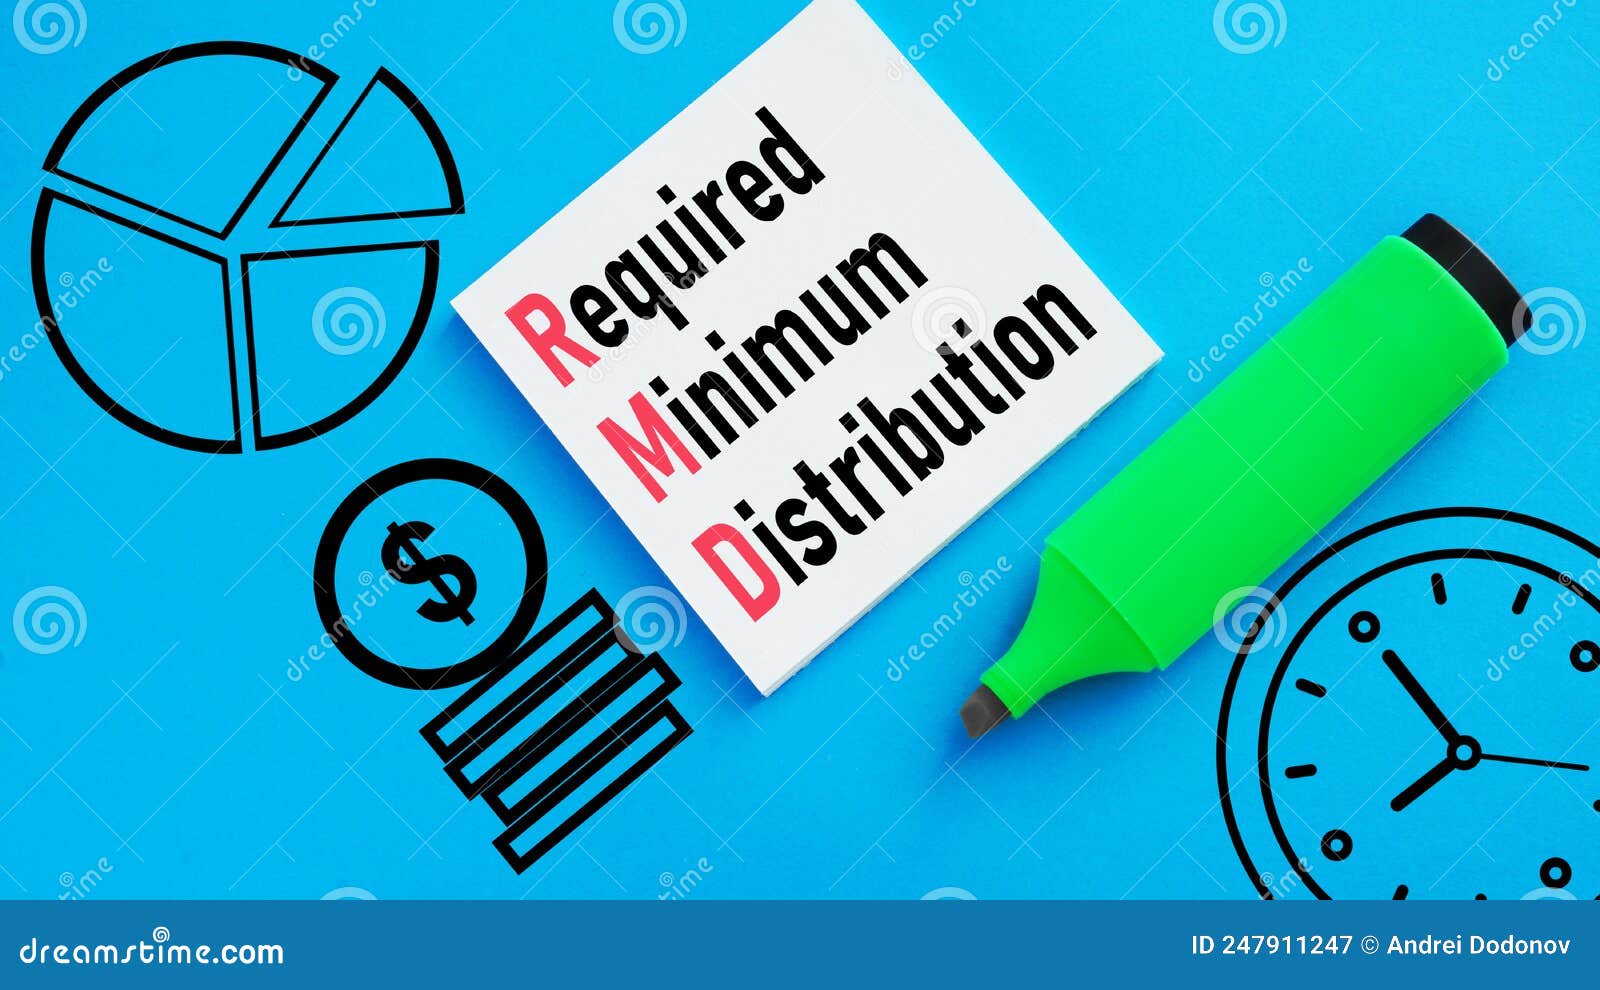 required minimum distribution rmd is shown using the text